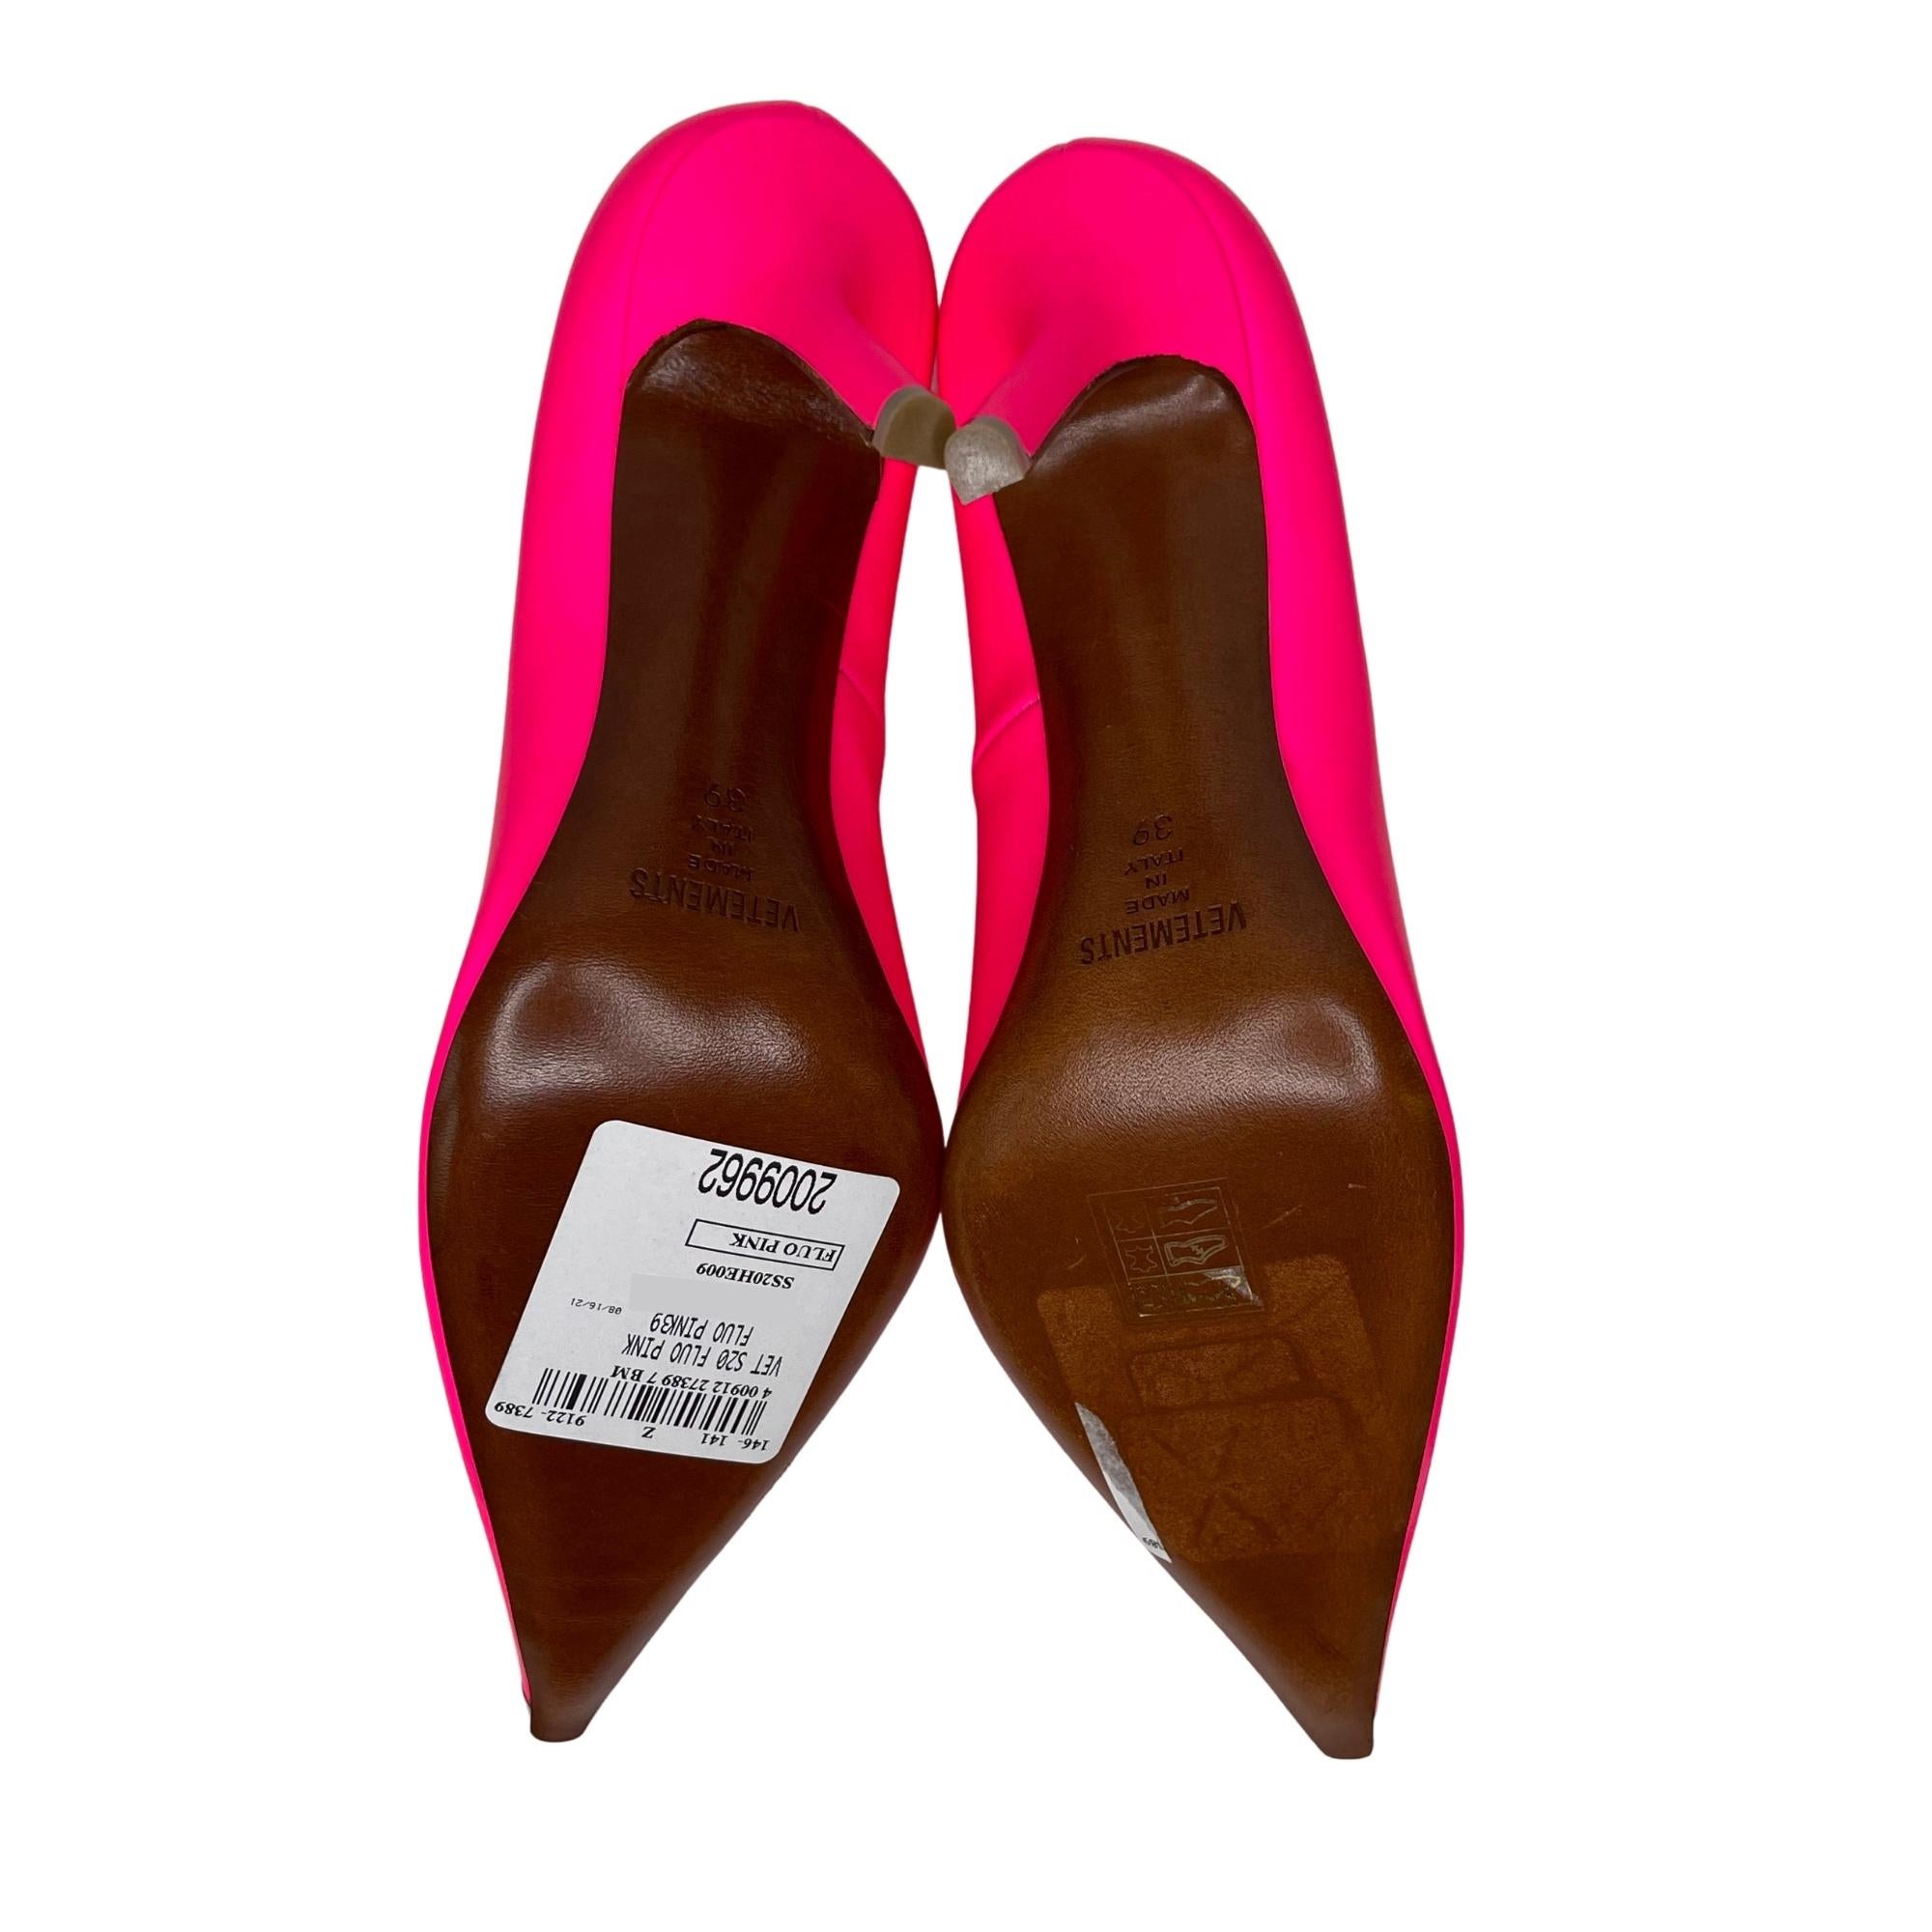 Vetements Rubberized Leather Fluorescent Pink Décolleté Heels (39 EU) In New Condition For Sale In Montreal, Quebec